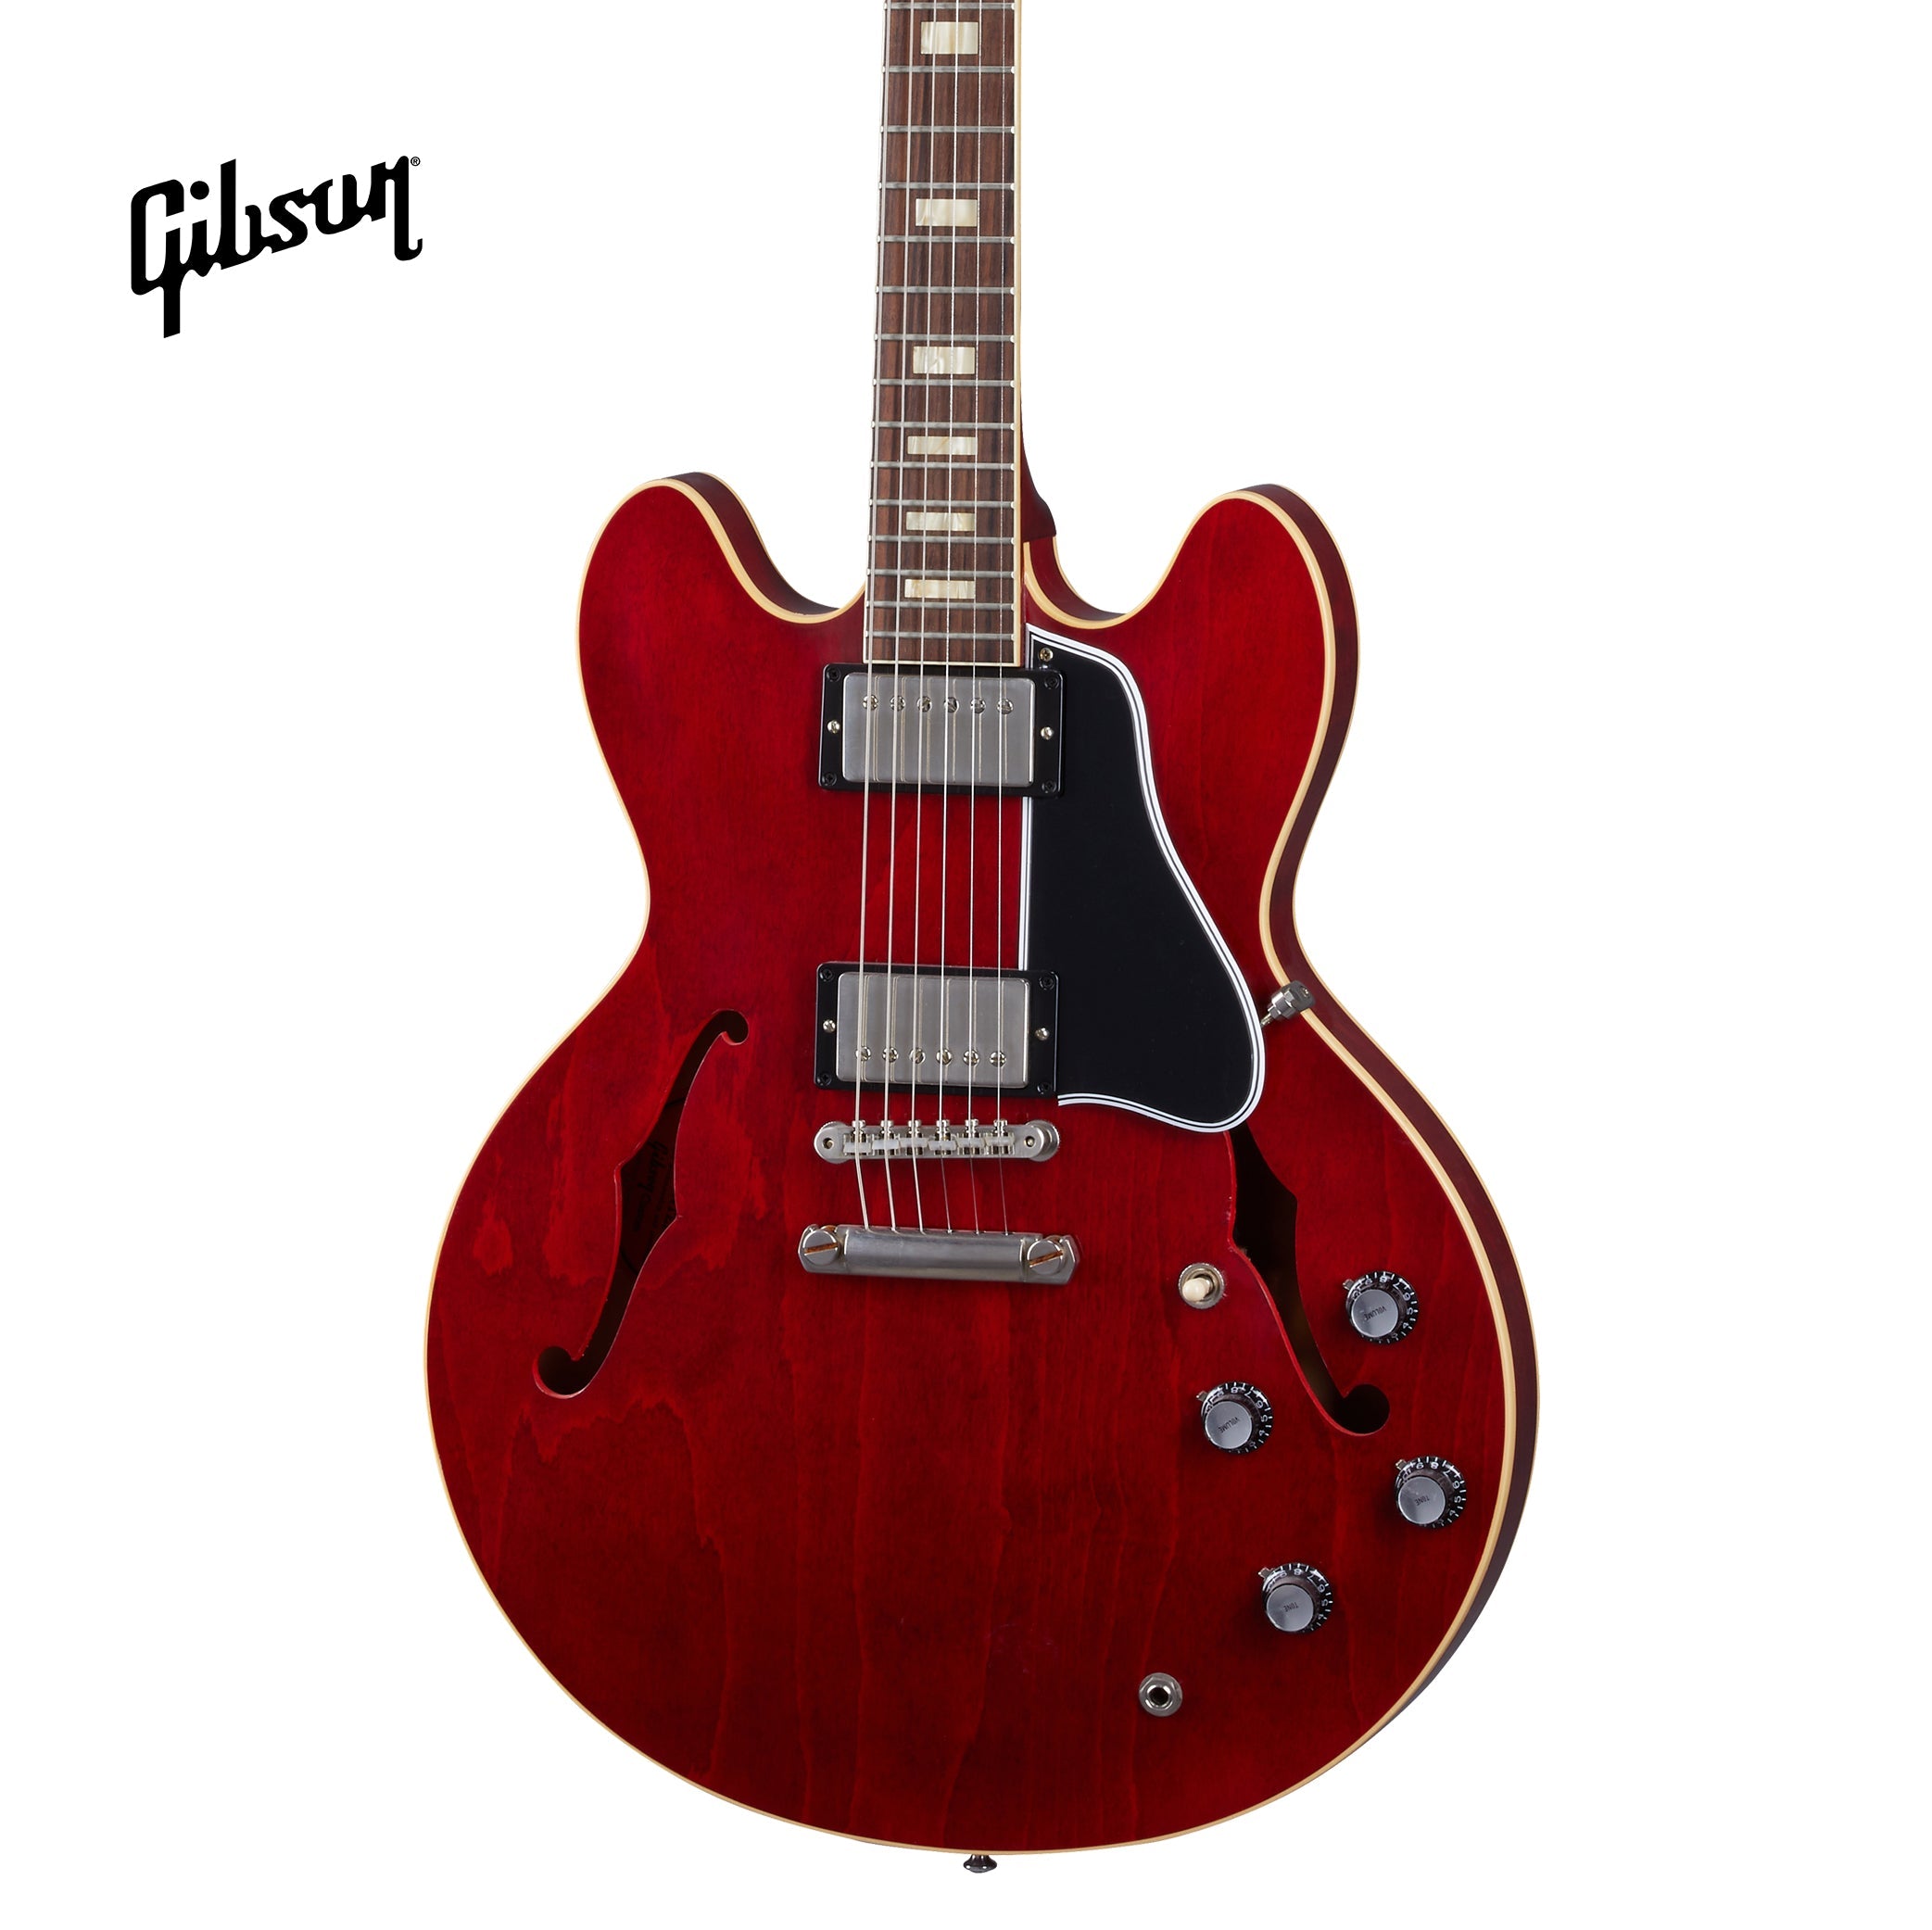 GIBSON 1964 ES-335 REISSUE ULTRA LIGHT AGED SEMI-HOLLOWBODY ELECTRIC GUITAR - 60S CHERRY